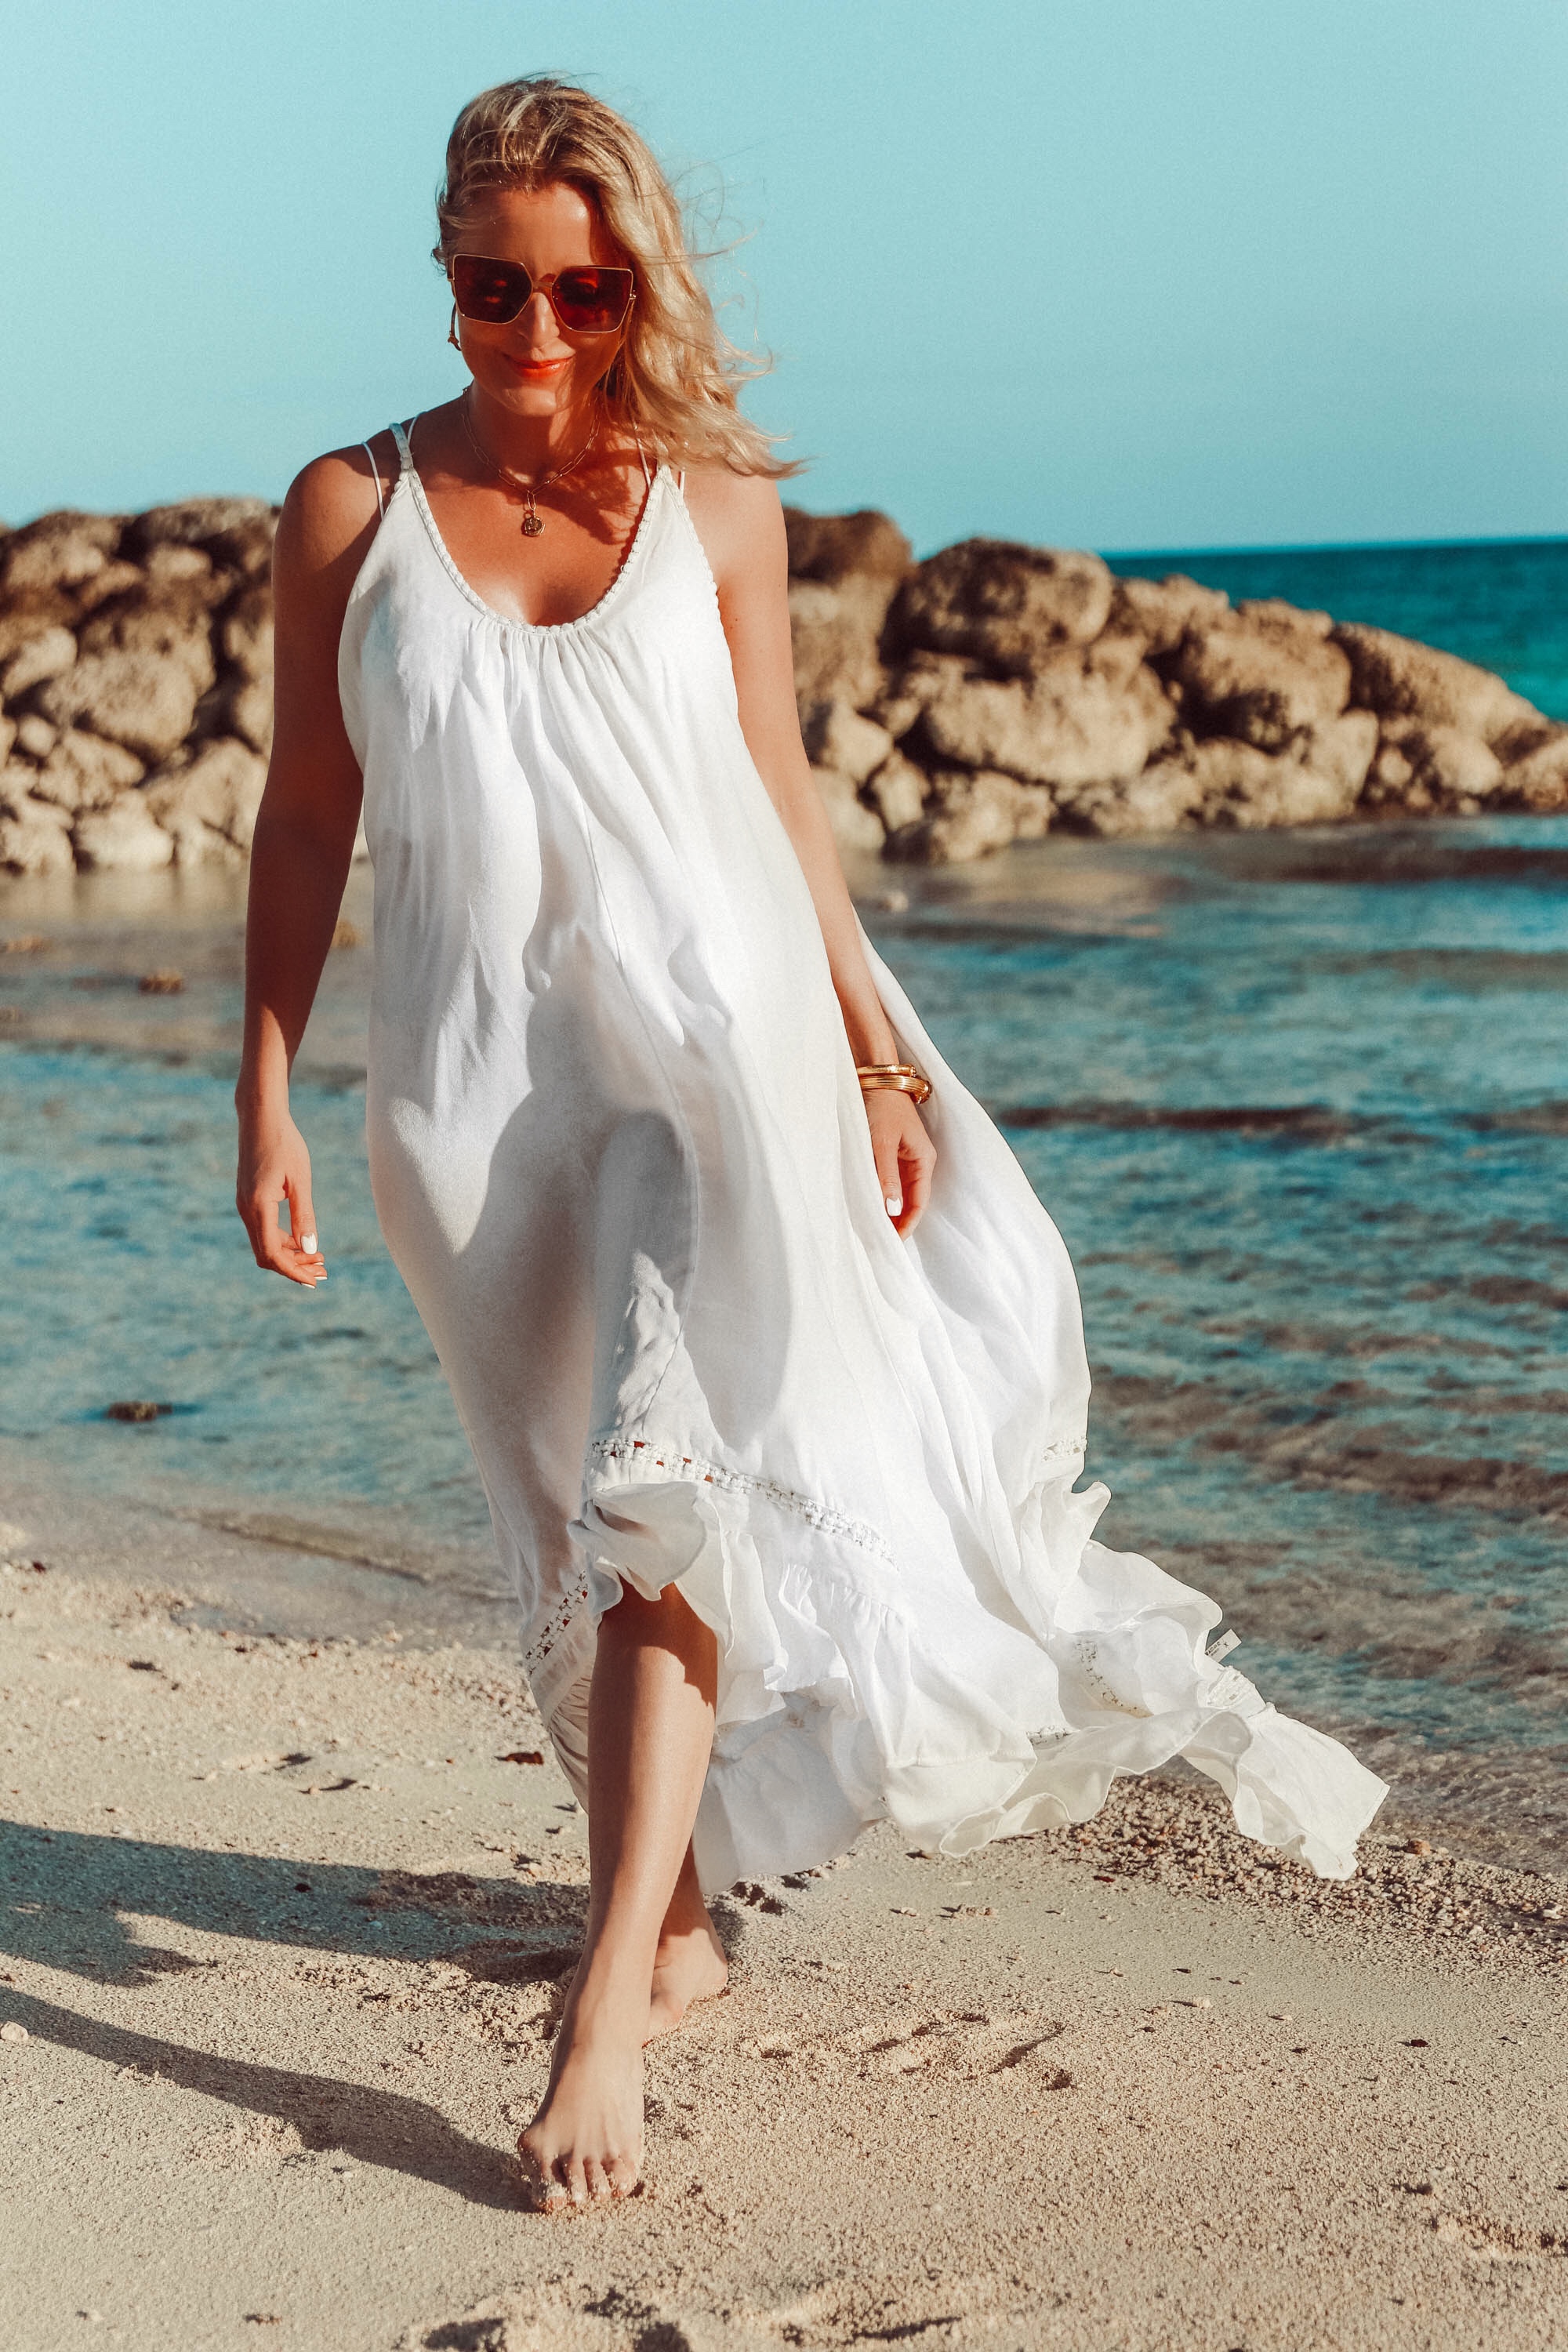 Best Coverups, Fashion blogger Erin Busbee of BusbeeStyle.com wearing a white Free People maxi dress and white lace bralette in the Bahamas